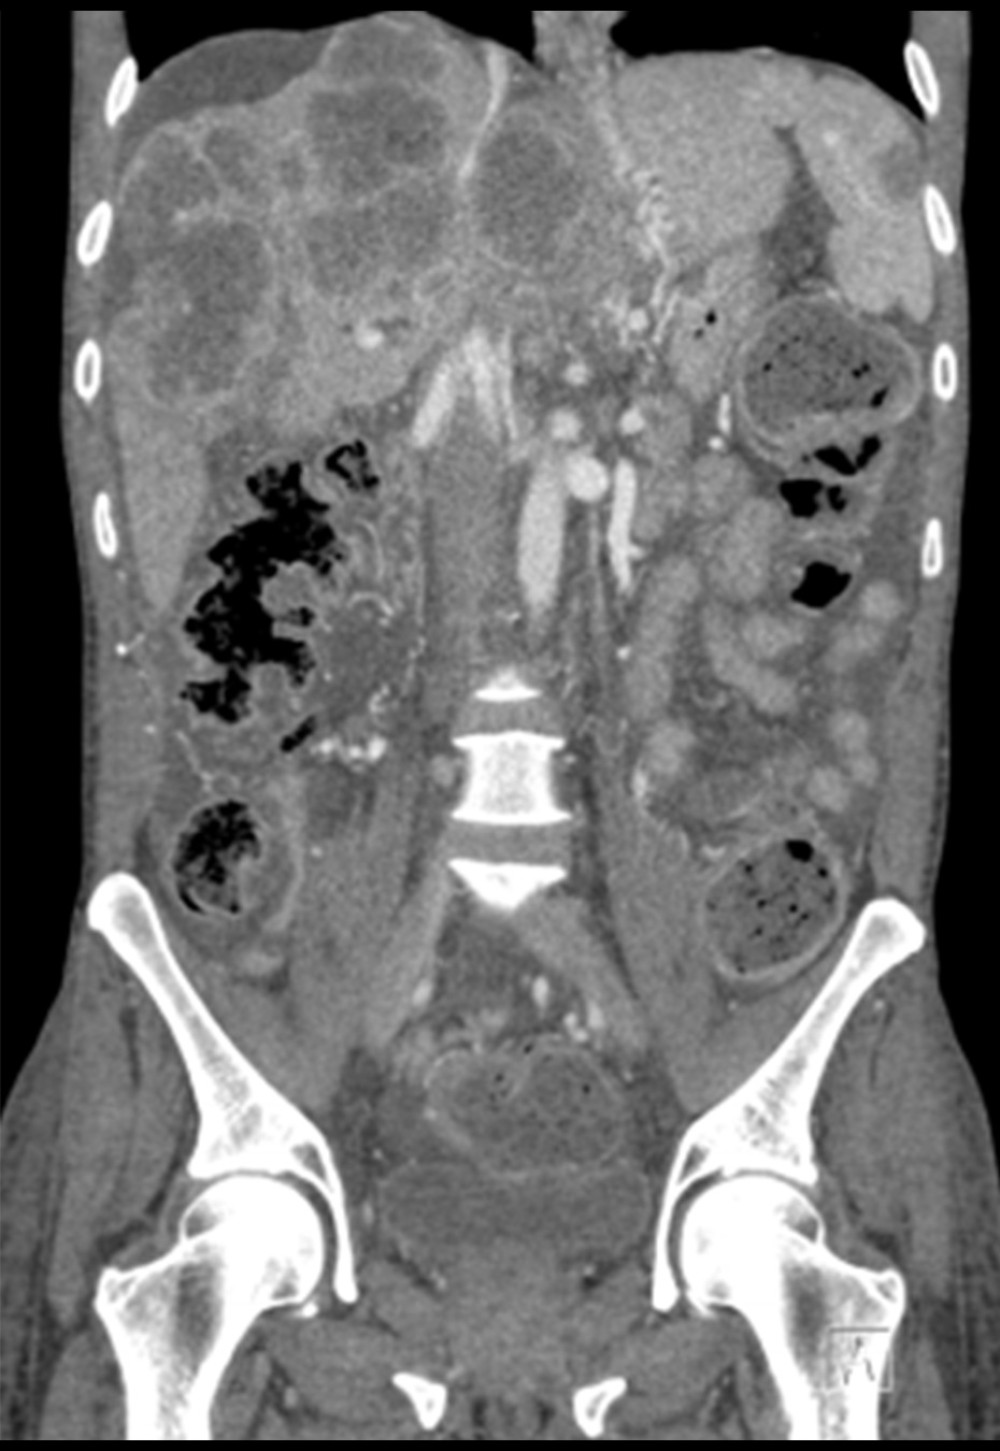 Computed tomography (coronal projection) scan of the abdomen and pelvis demonstrating liver metastases radiographically resembling a sigmoid colon, illustrating the concept of homomorphism.